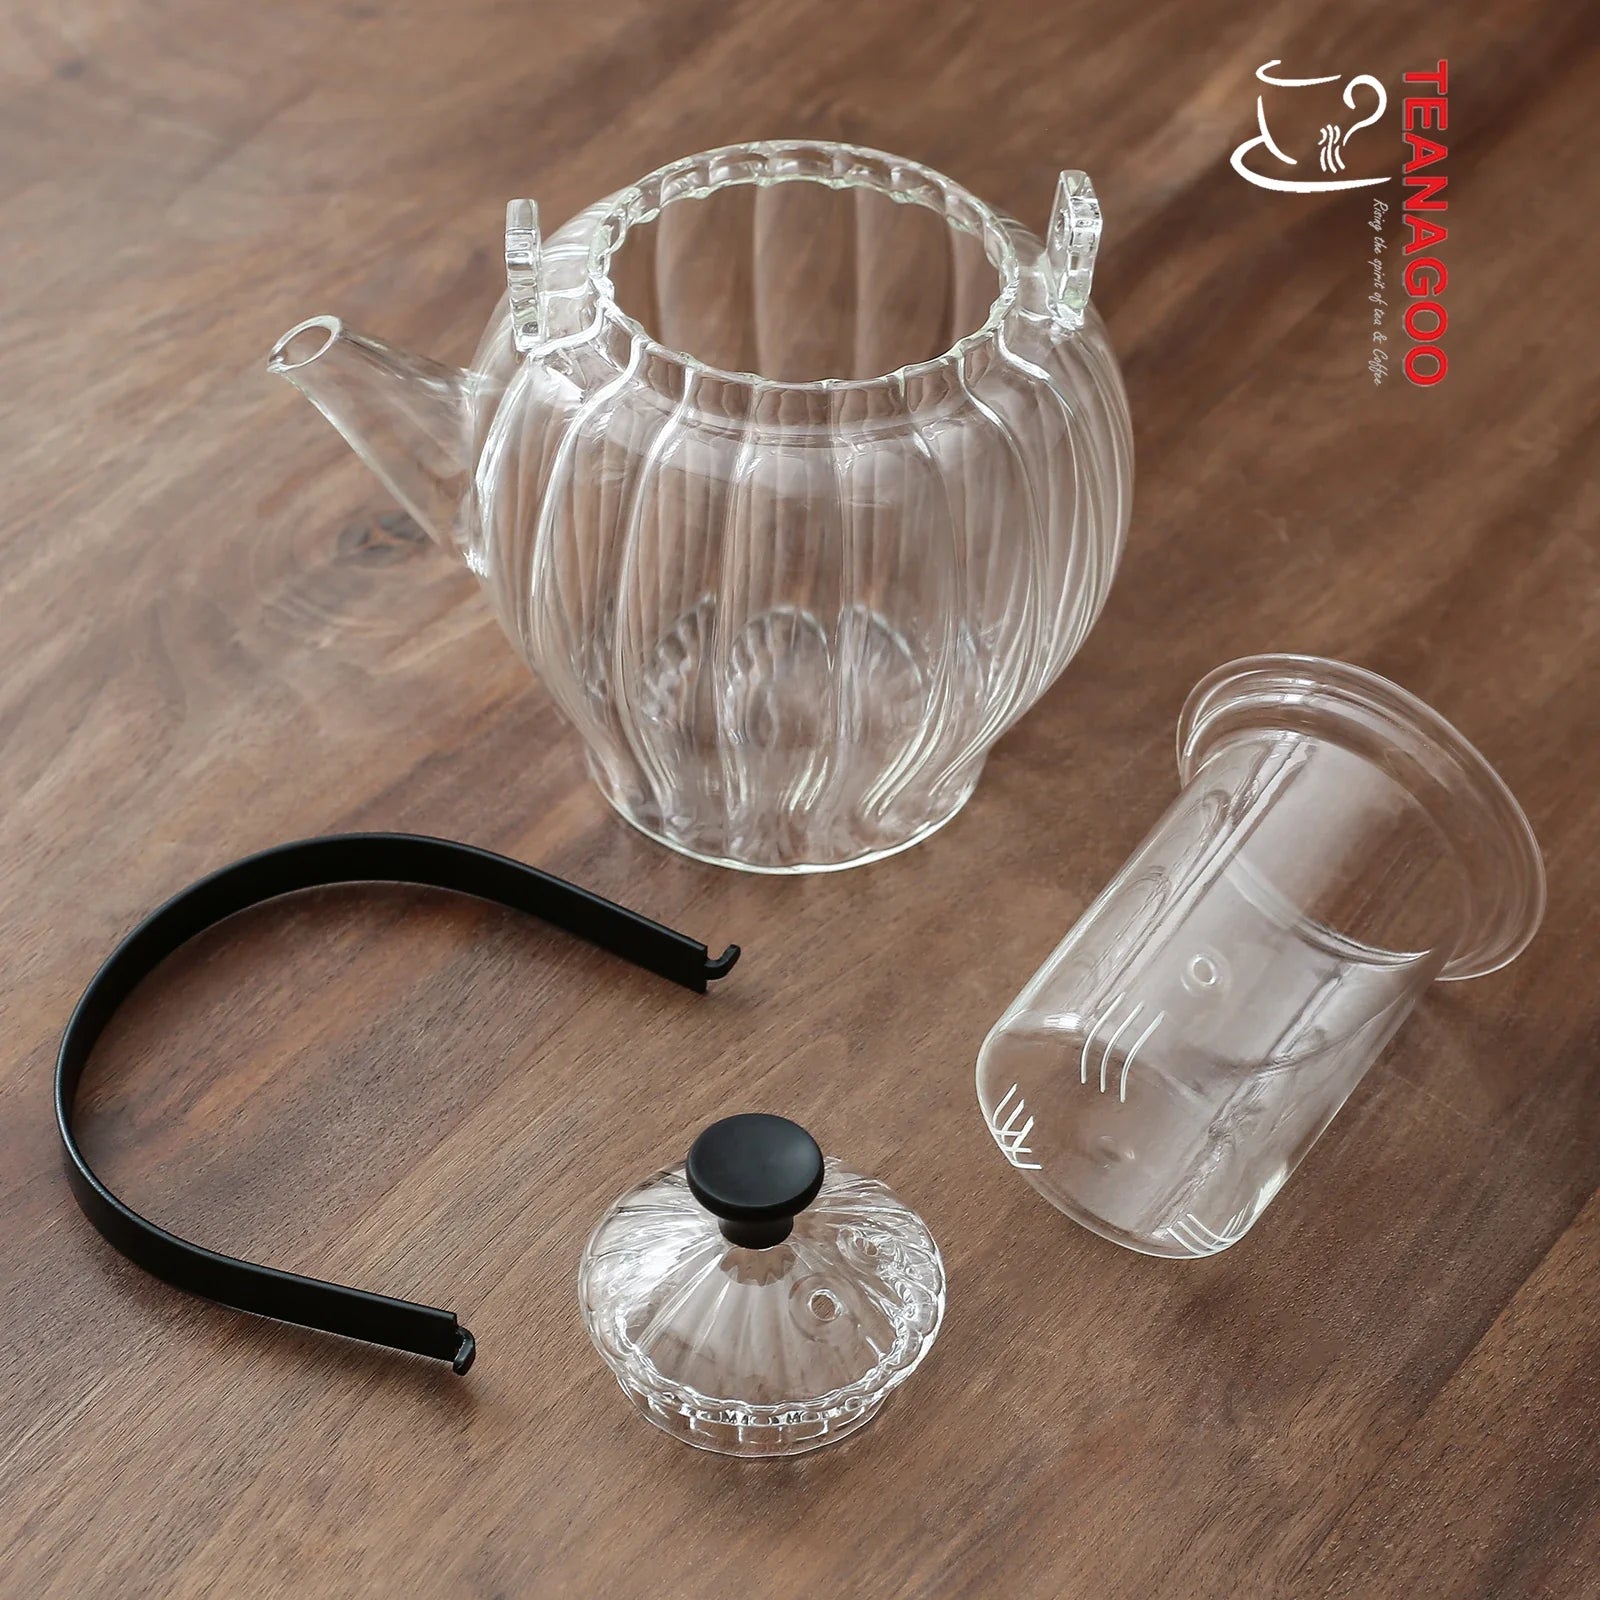 Glass Teapot for Stovetop Safe with Infuser - Borosilicate Glass Tea Kettle  with